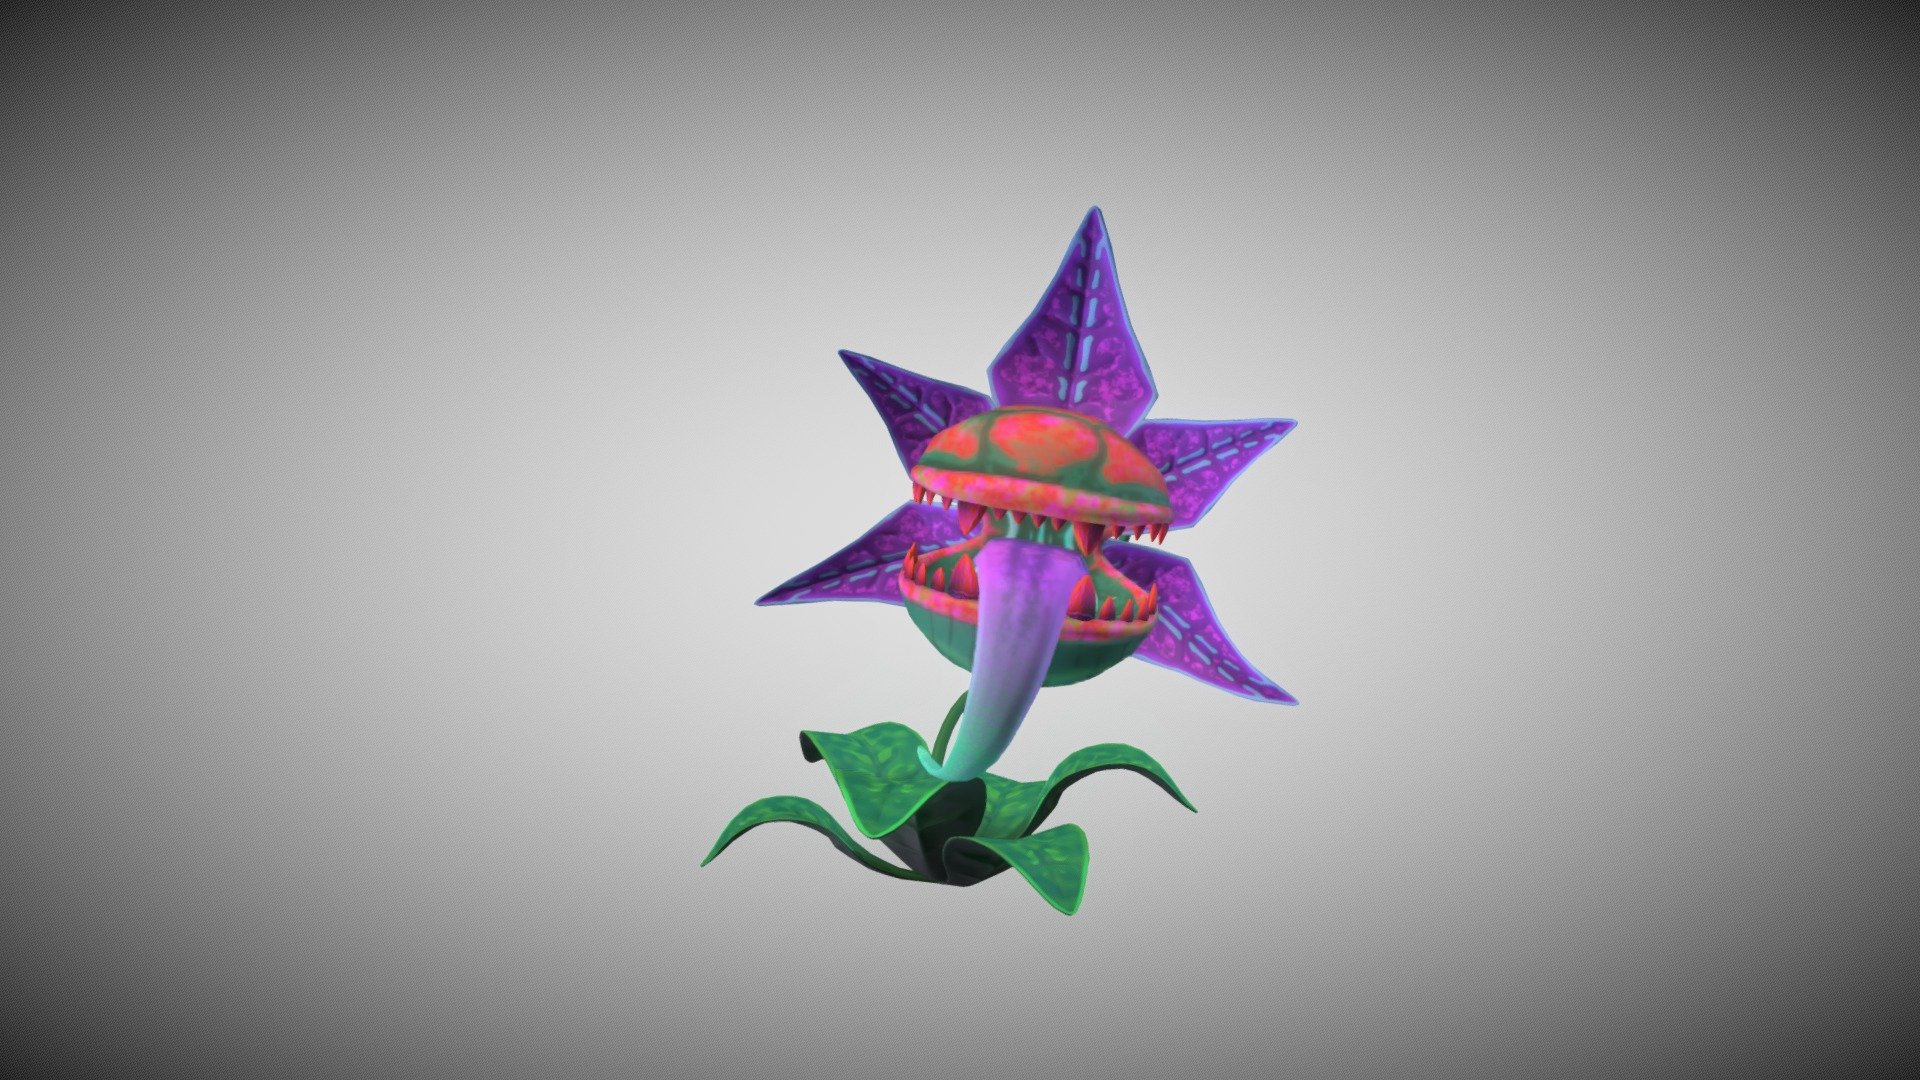 I made this stylized piranha plant for a game project I'm working on, hope you like it.

artstation project: https://www.artstation.com/artwork/lxKgWk - Stylized Piranha Plant - 3D model by Spark3dvision 3d model